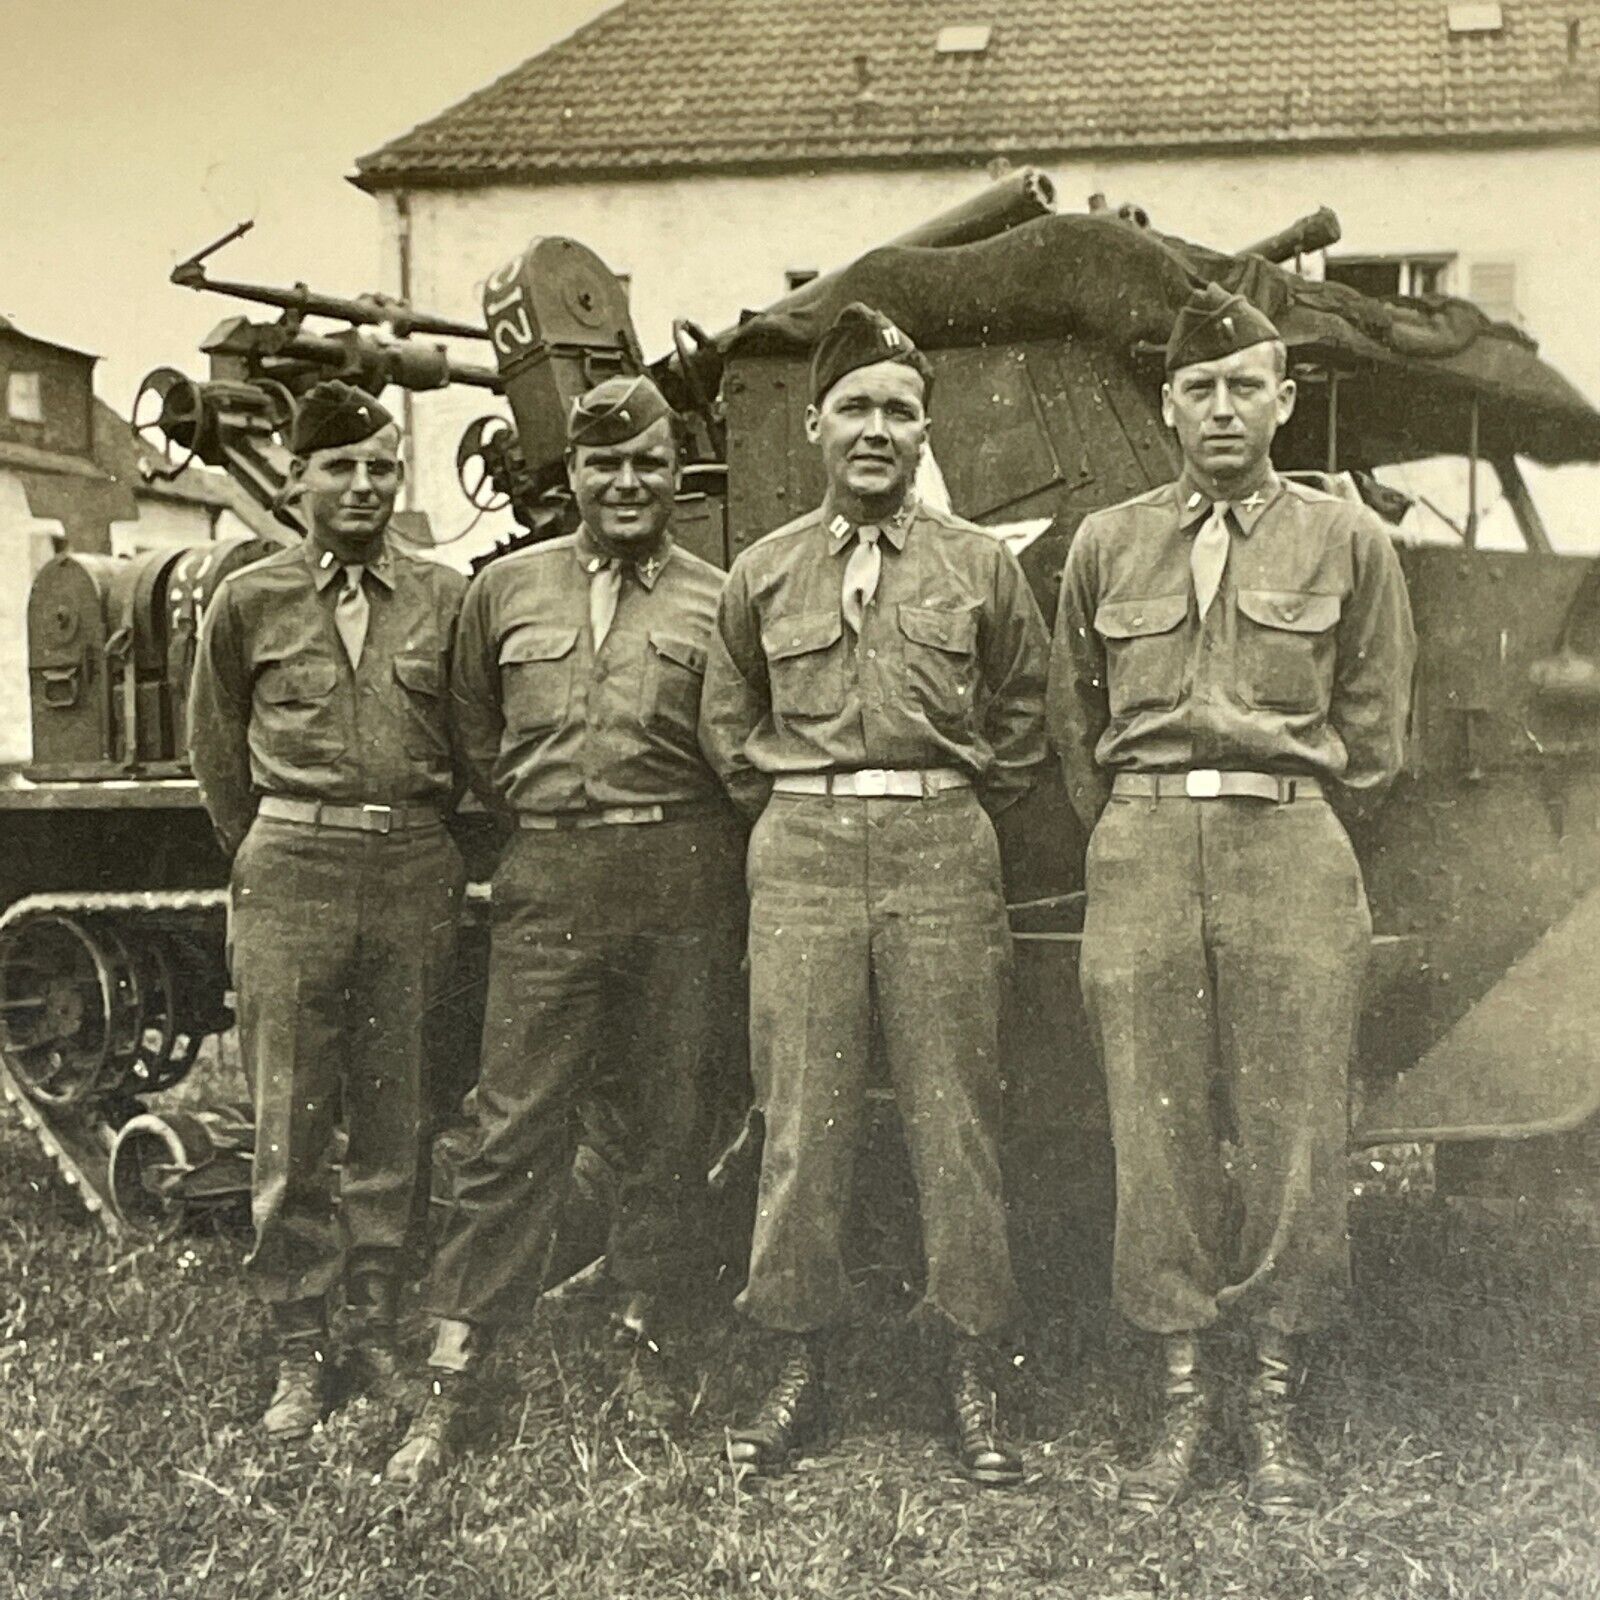 Z2 Photograph 1940's Handsome Group Military Men Posing With Old Tank Europe